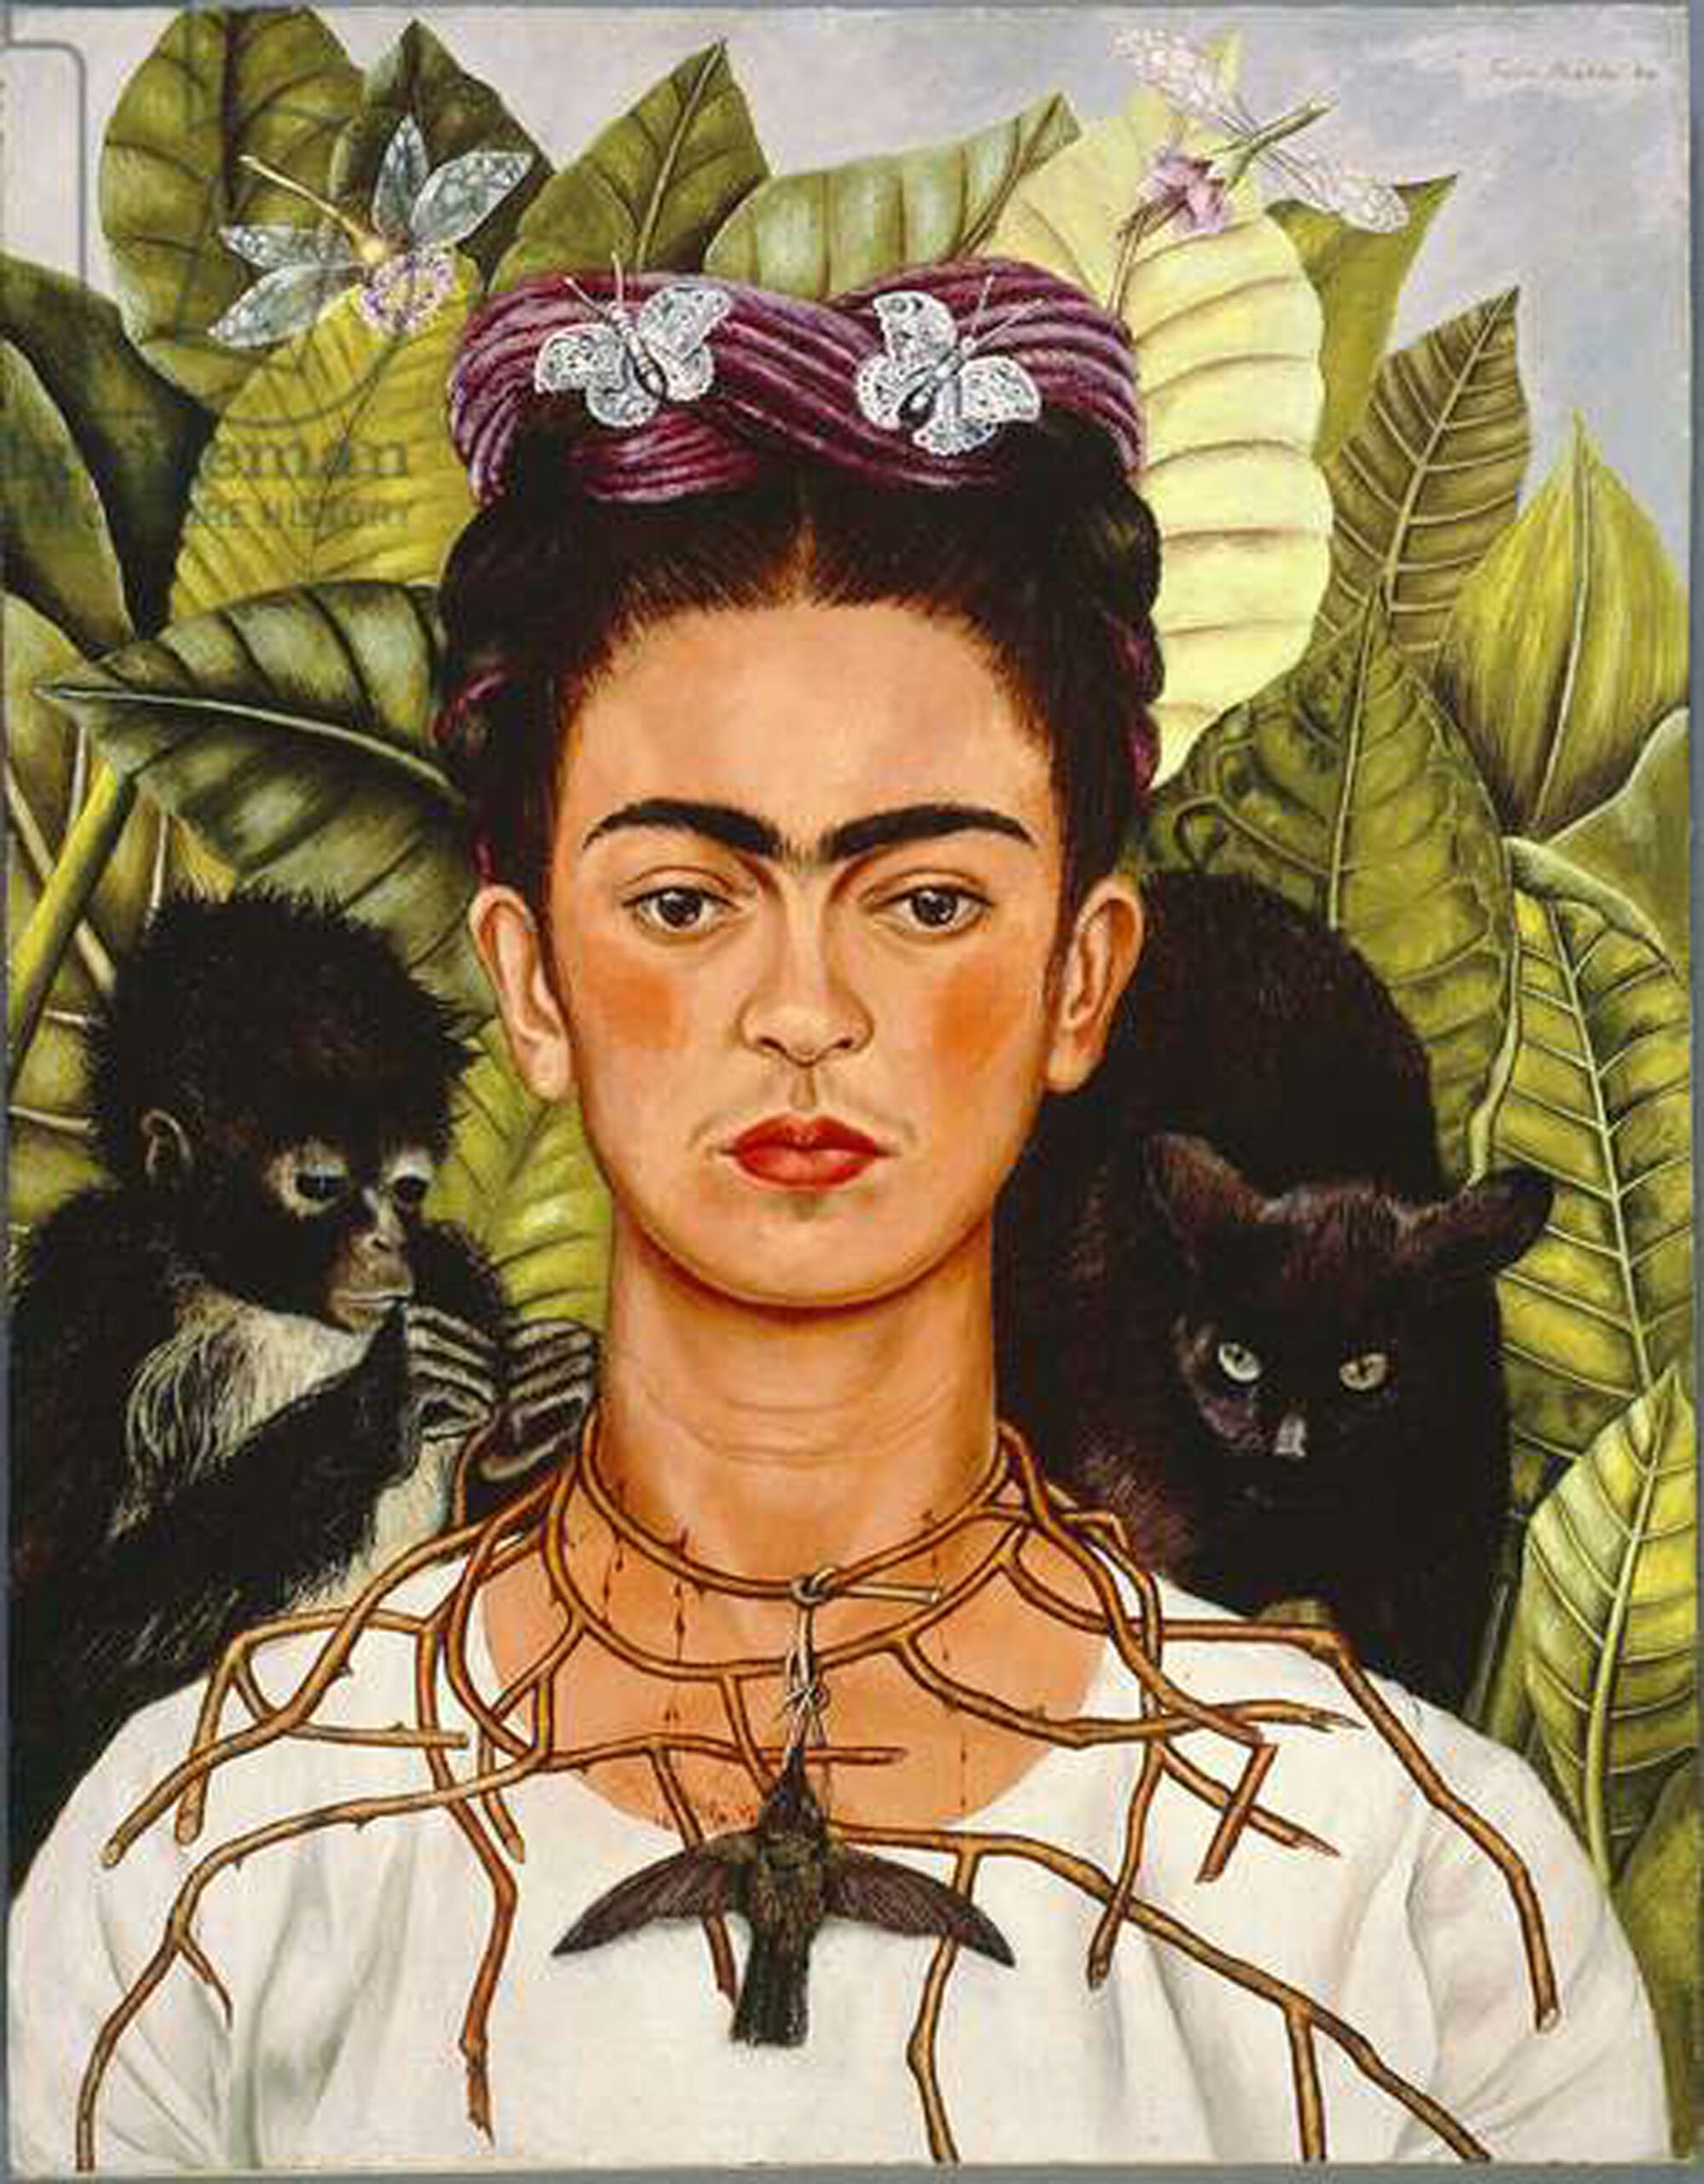 The Wick - Frida Kahlo, Self-Portrait with Thorn Necklace and Hummingbird, 1940